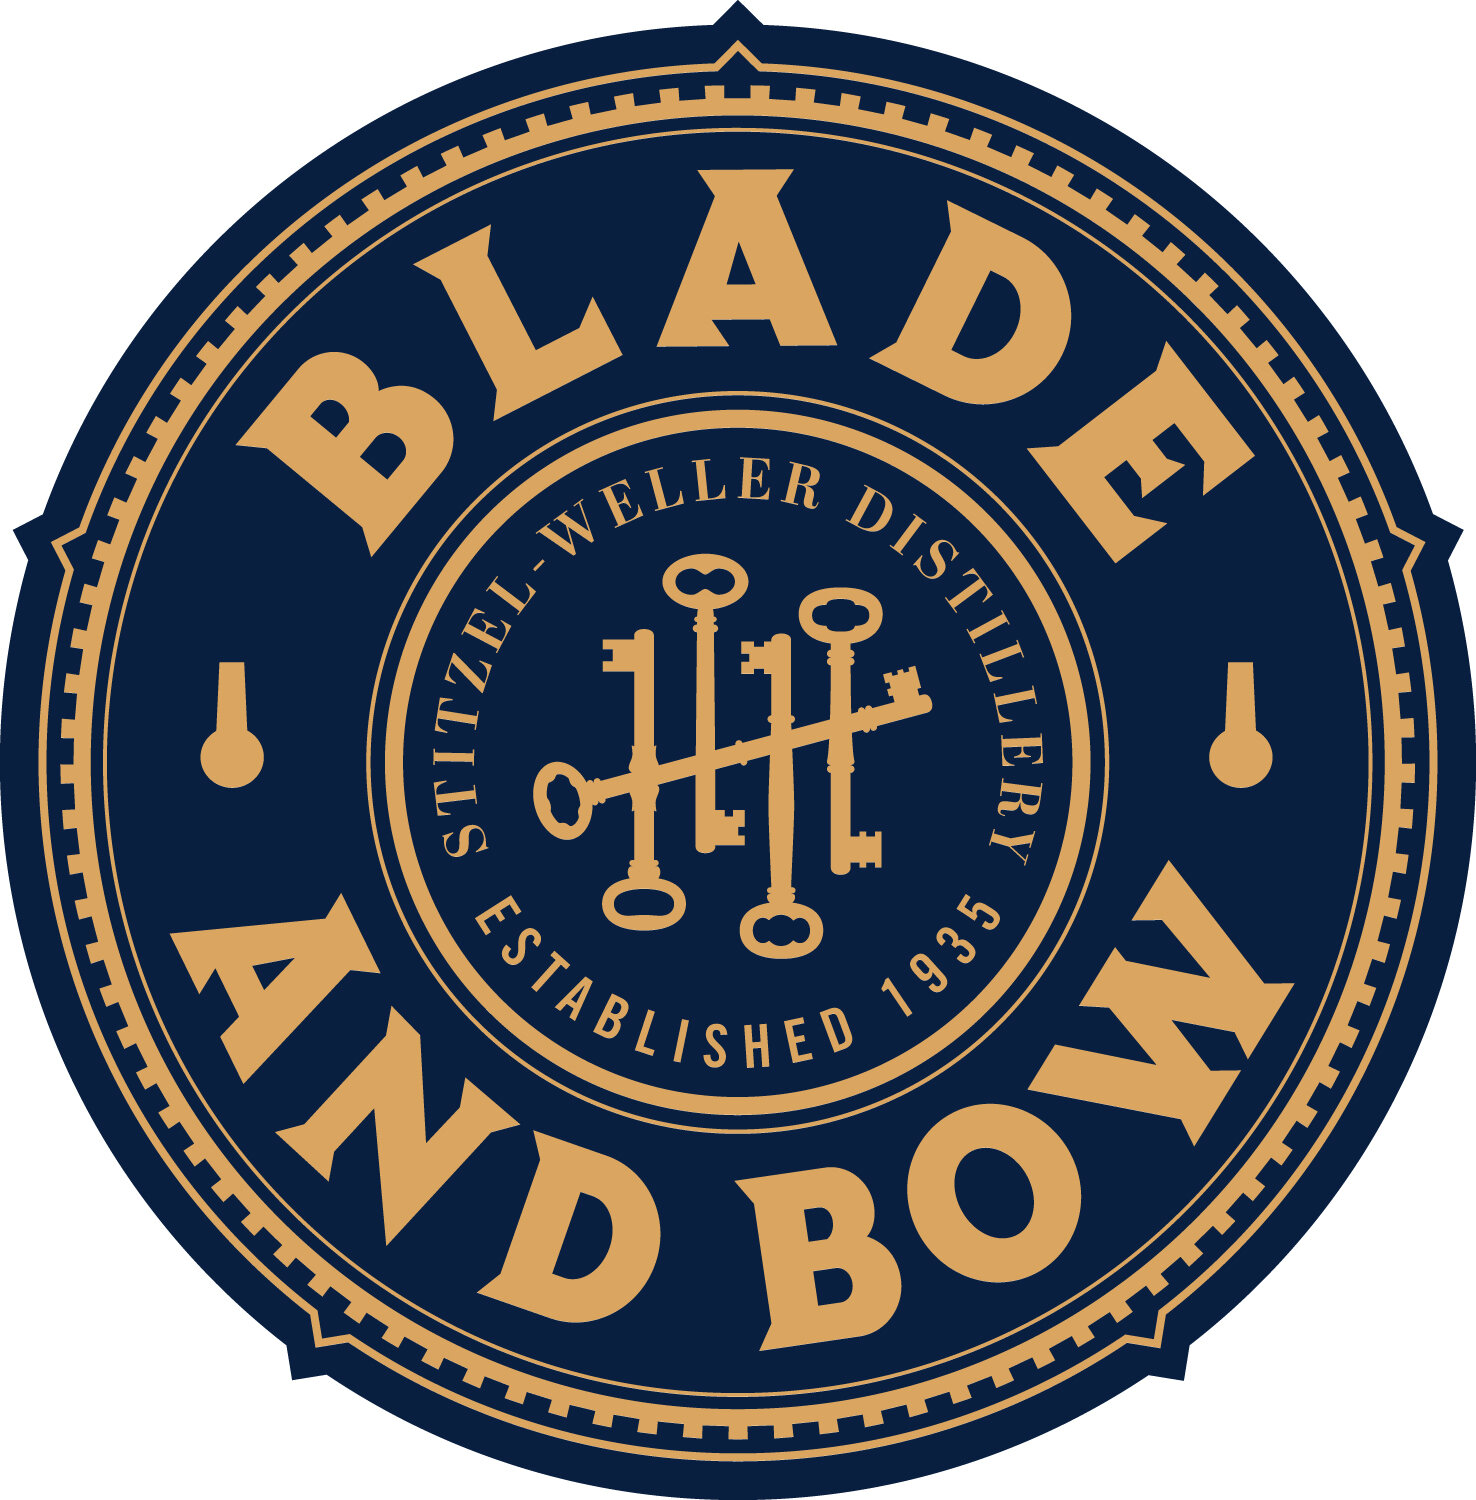 Blade and Bow